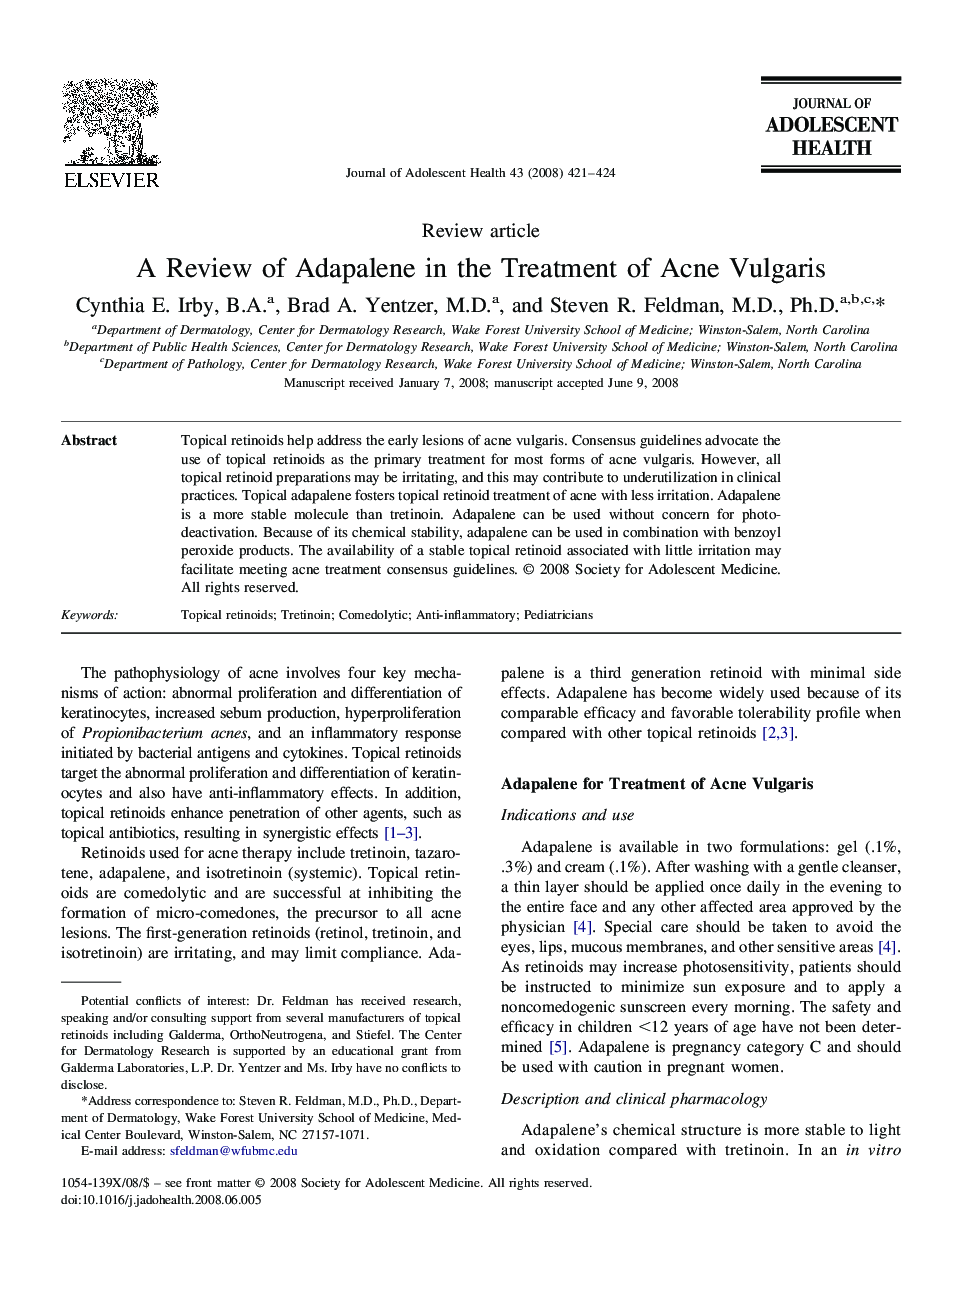 A Review of Adapalene in the Treatment of Acne Vulgaris 